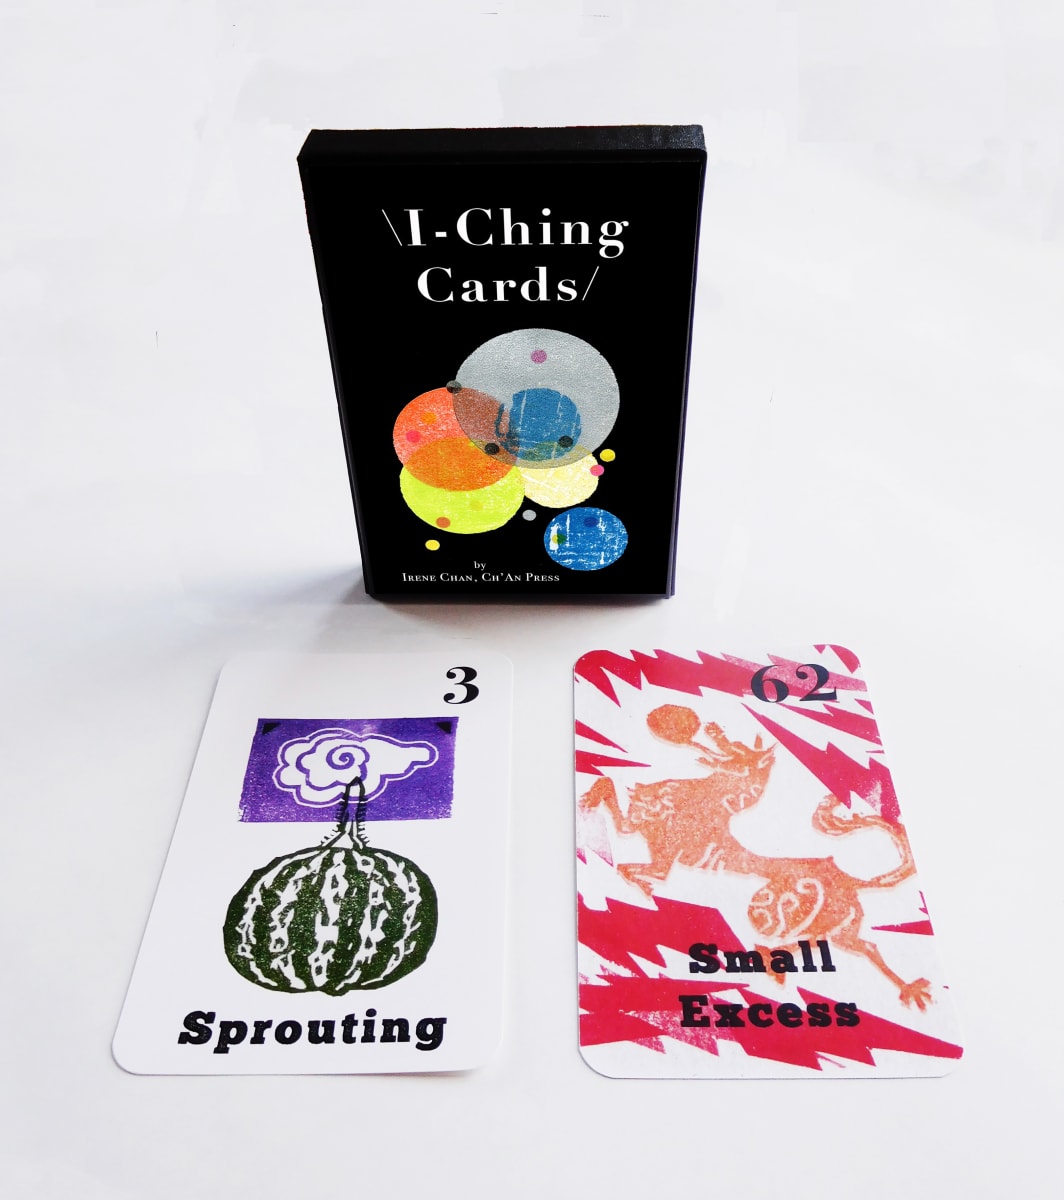 \I-Ching Cards/ by Irene Chan 